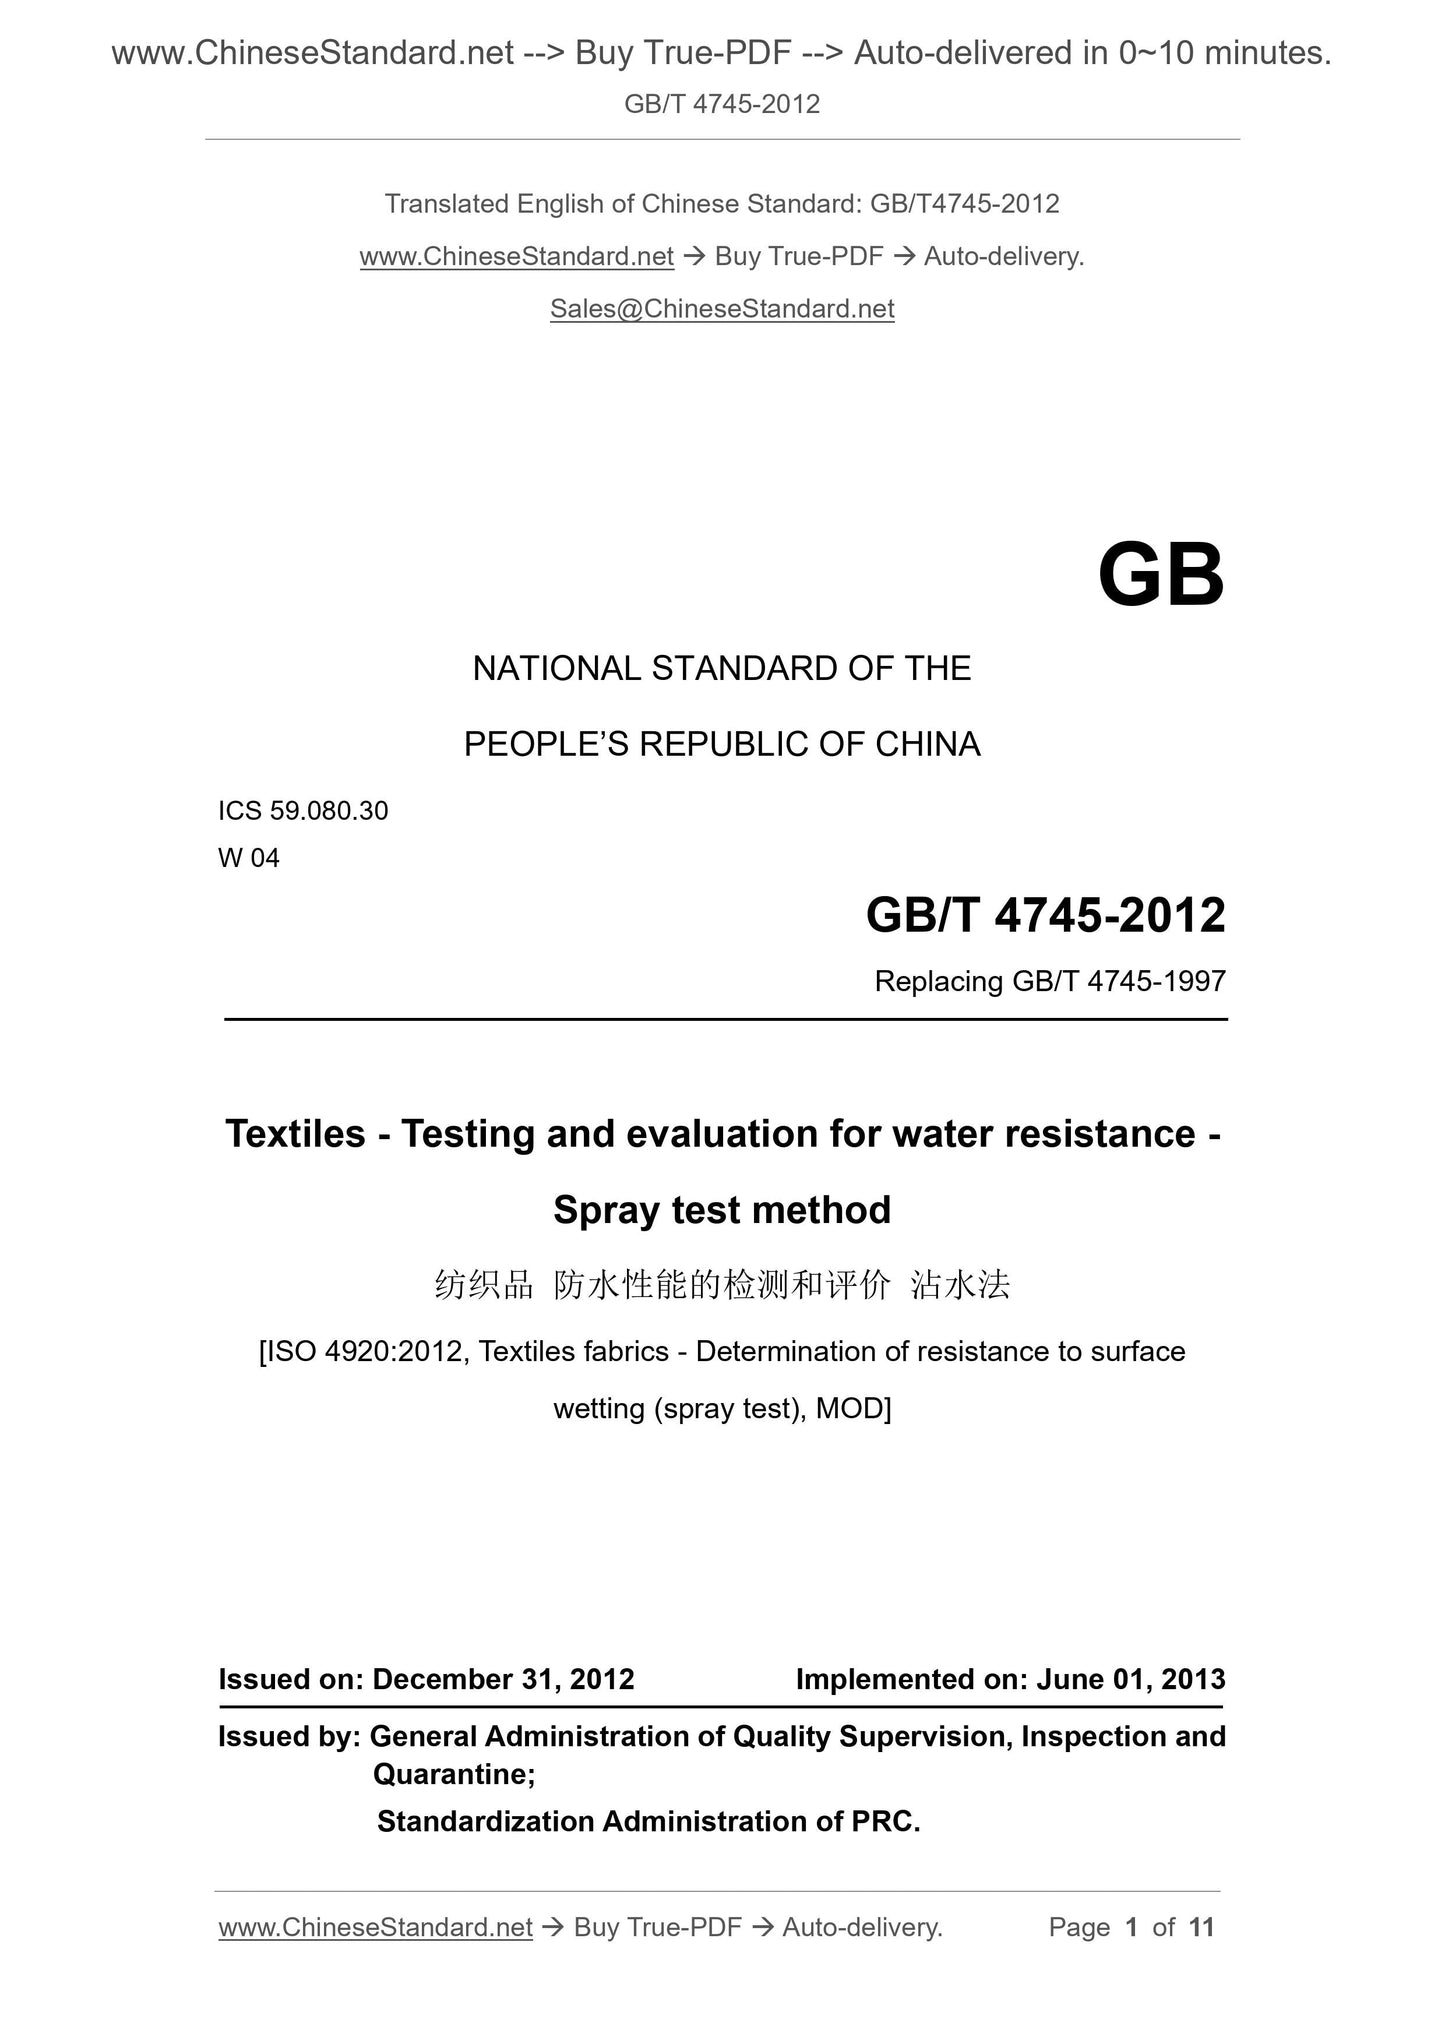 GB/T 4745-2012 Page 1